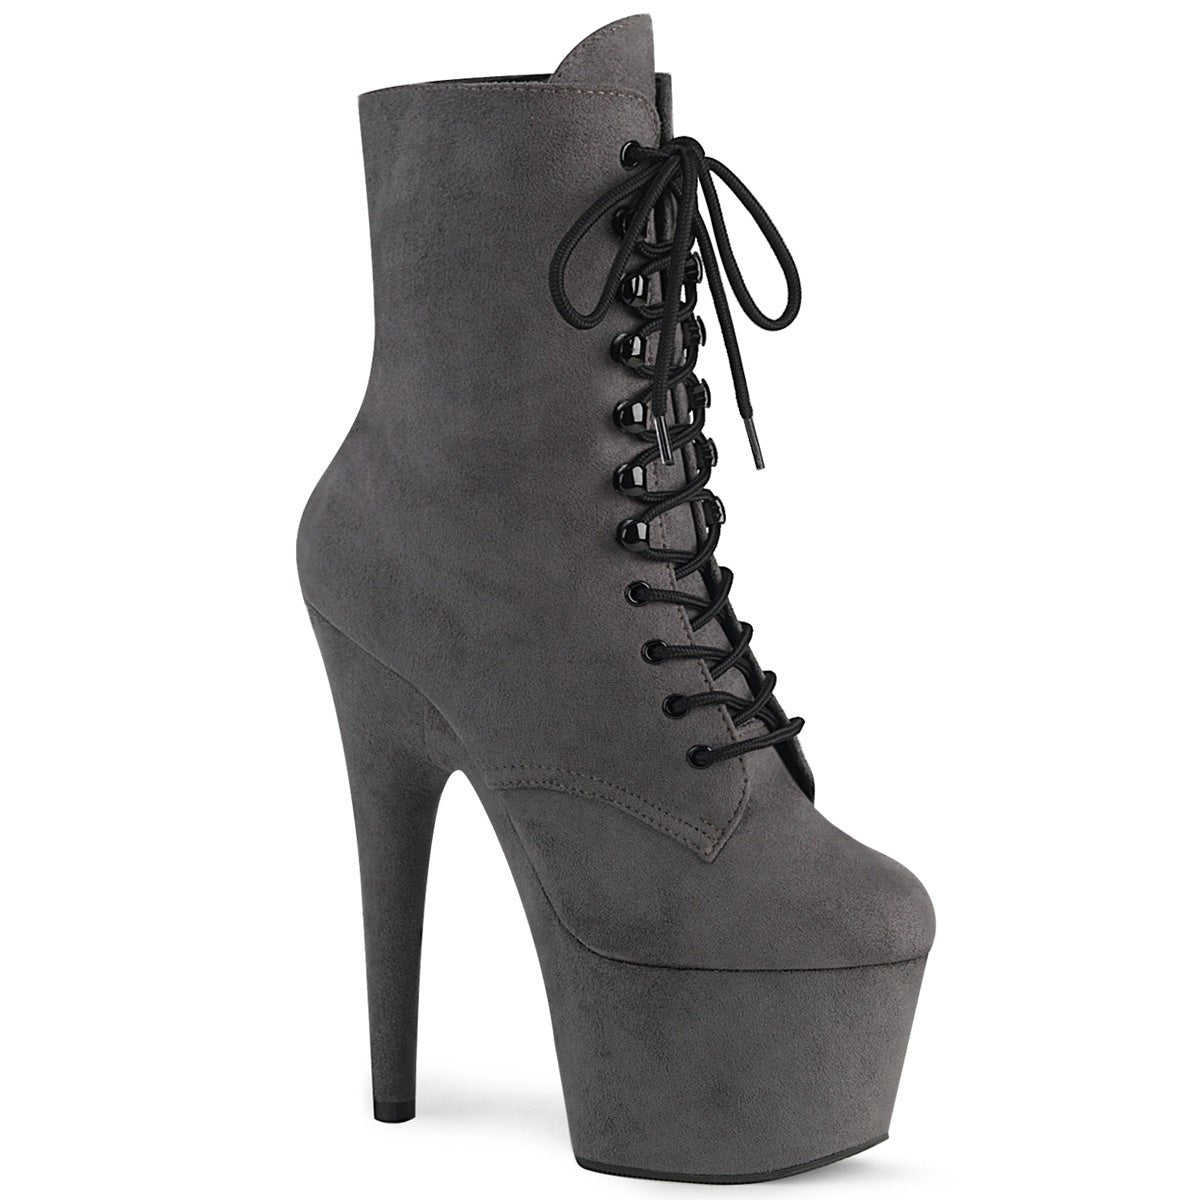 Pleaser ADORE 1020FS-2 Platform Boots,Front Lace Boots - From Pleaser Sold By Alternative Footwear